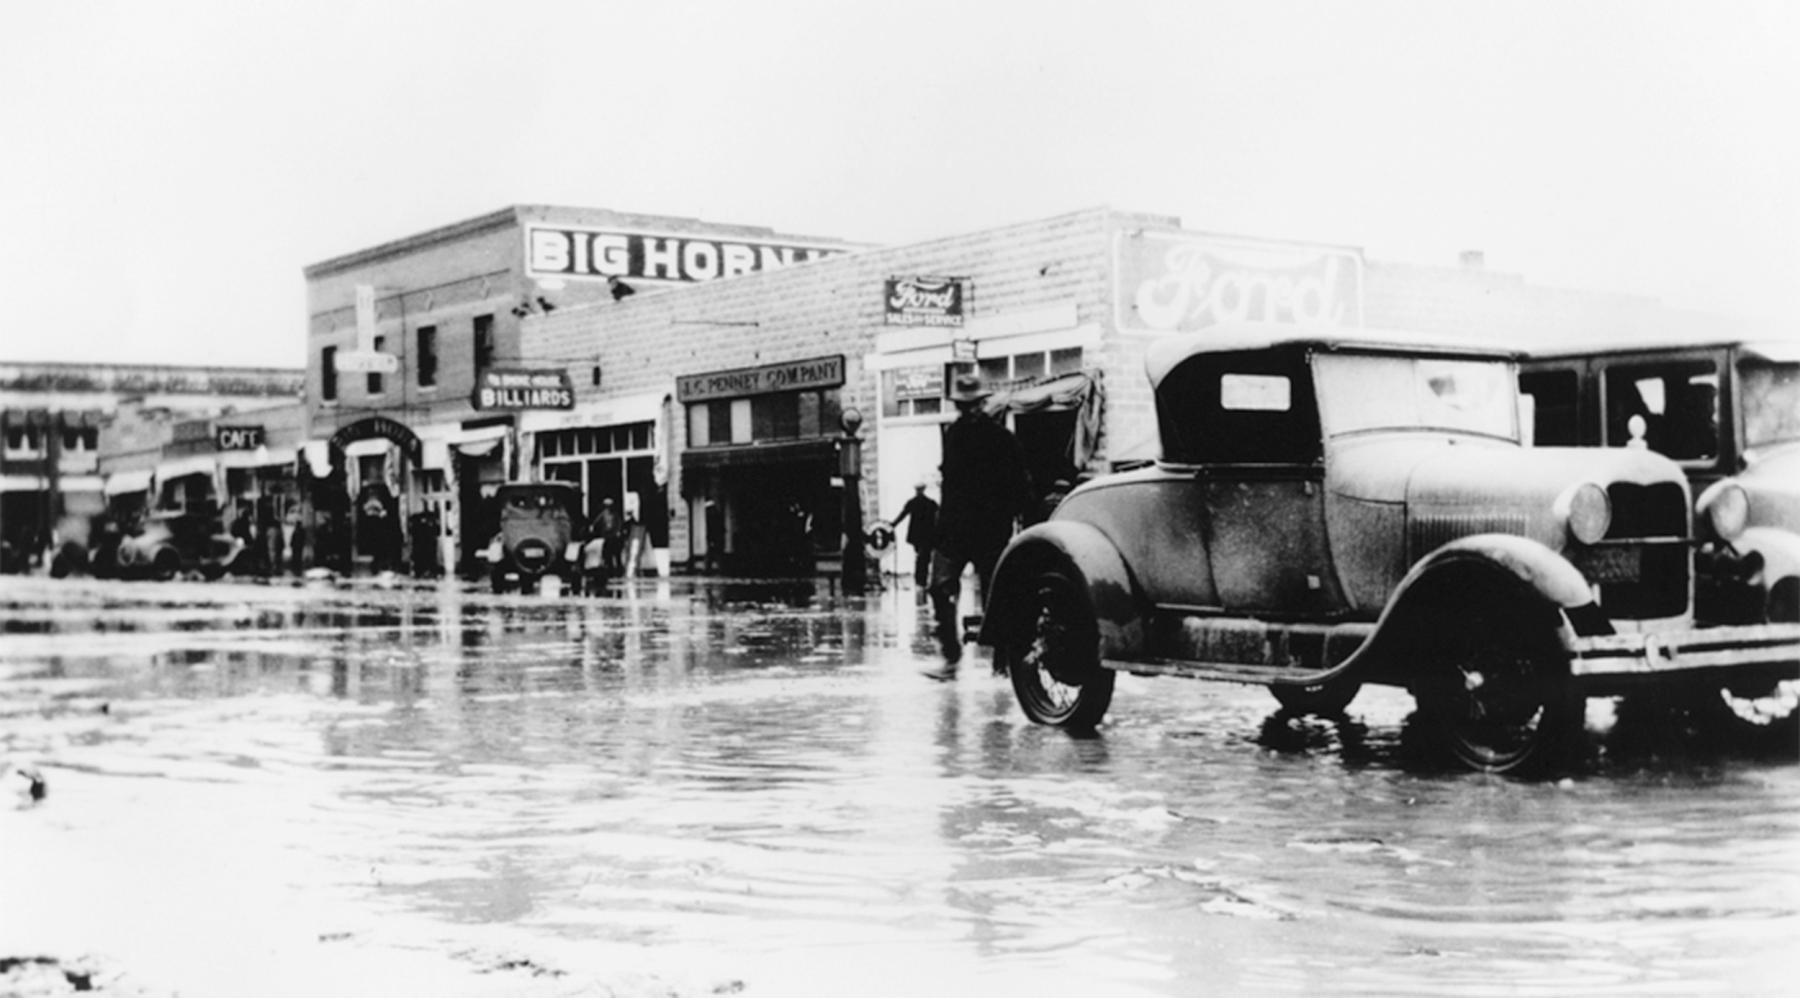 Floods in Greybull in the spring of 1929  left one child dead from a vehicle accident and at least 35 families destitute, destroying homes and businesses. Lizabeth Wiley raised funds and led relief efforts up to the end of her third and final term as mayor in 1930. Wyoming State Archives. 